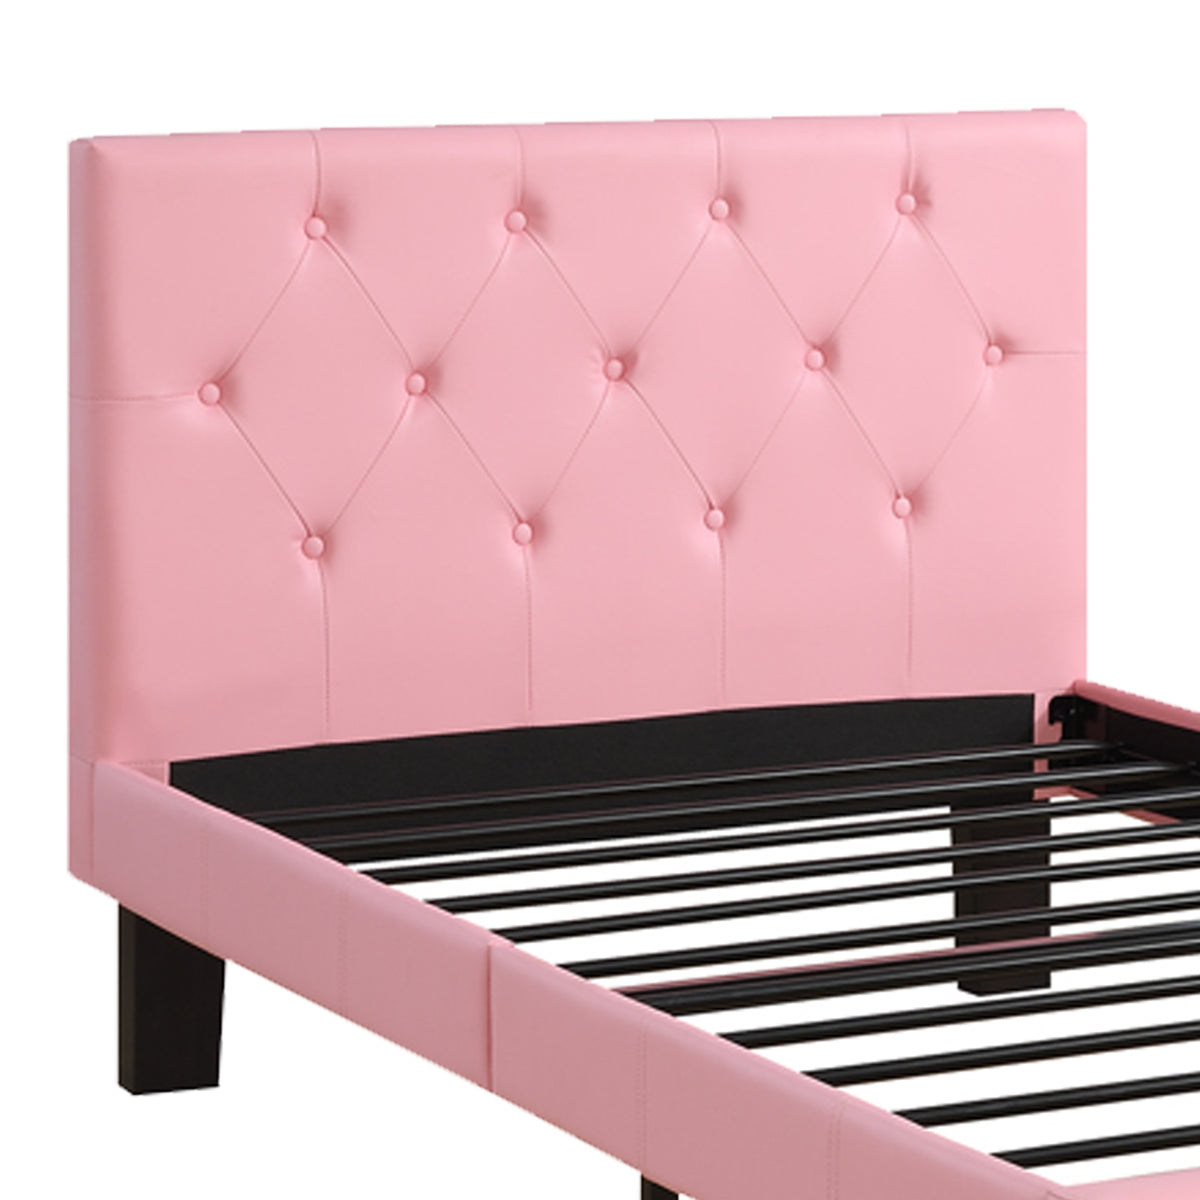 Faux Leather Upholstered Twin size Bed With tufted Headboard, Pink - BM171751